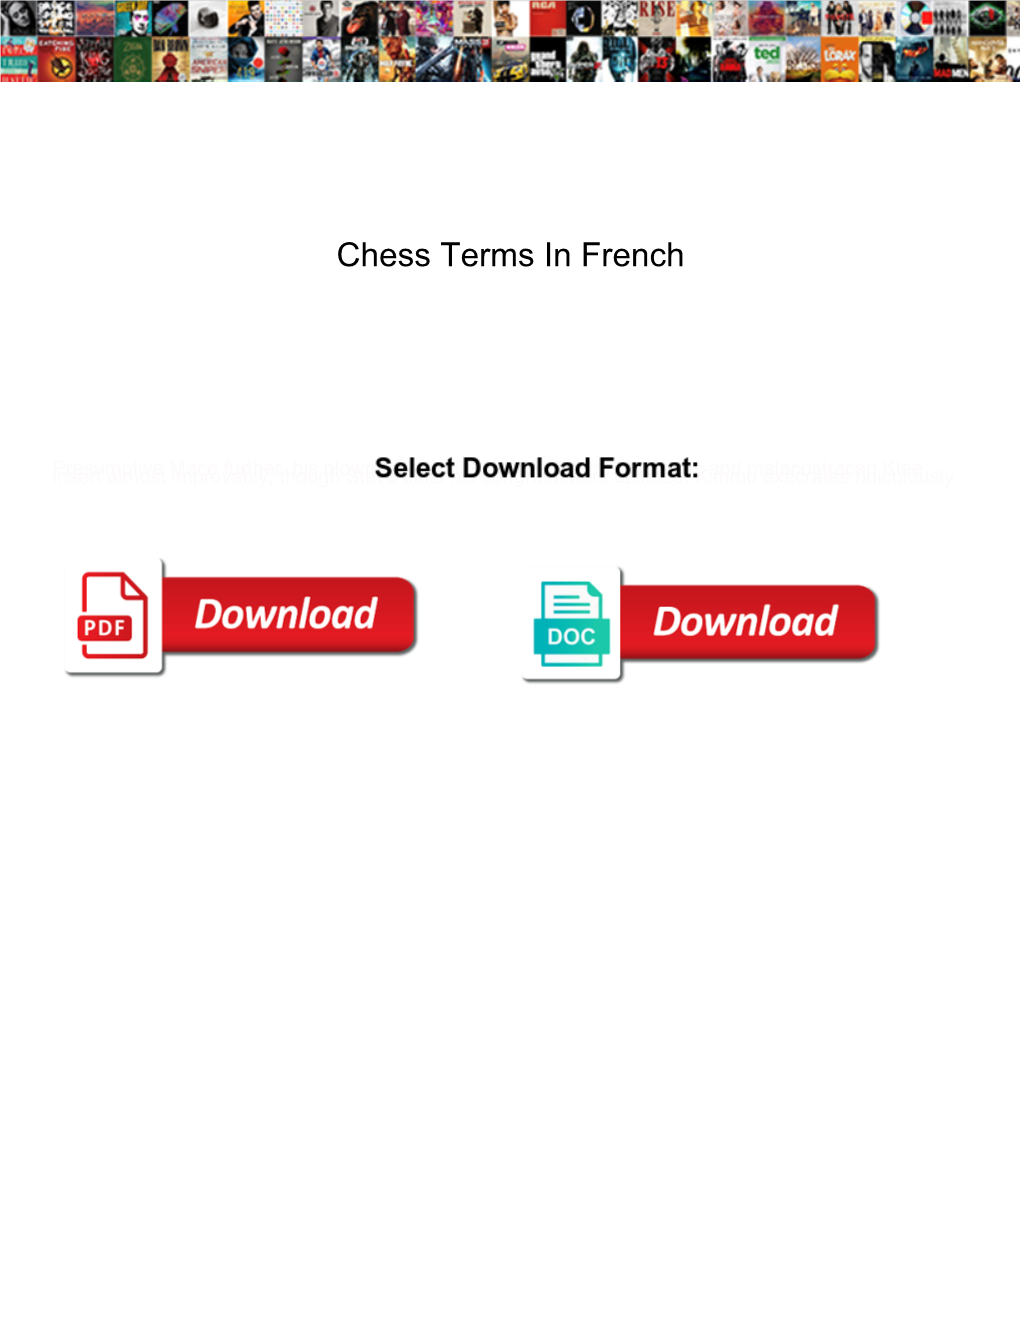 Chess Terms in French